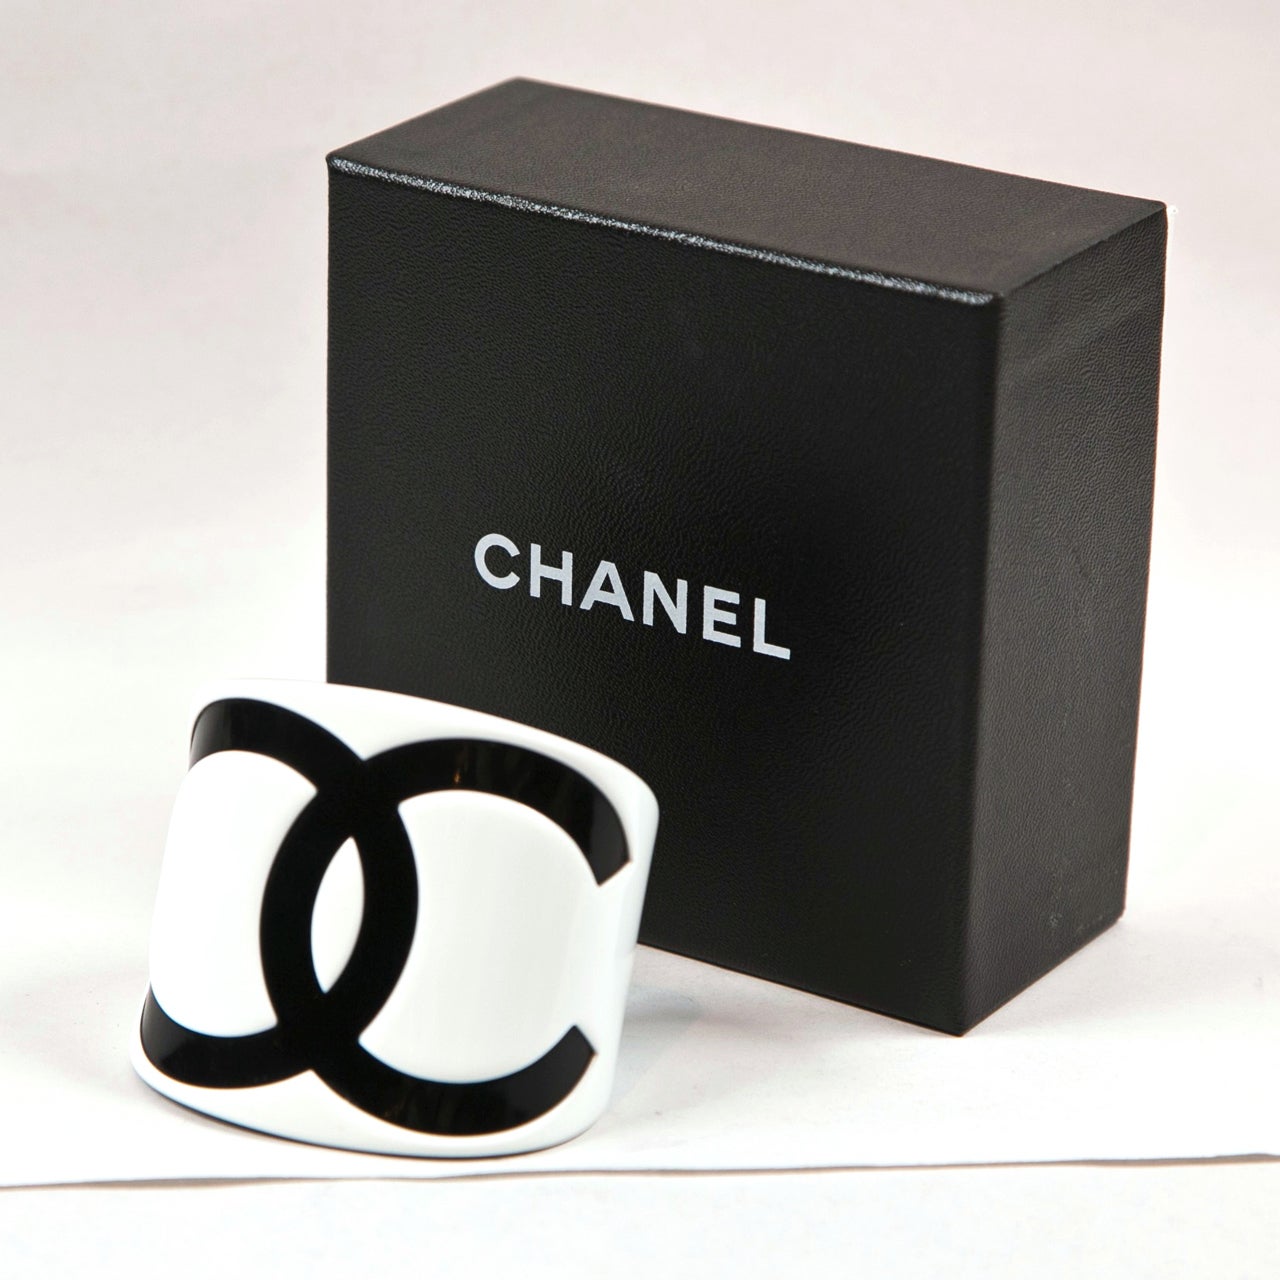 Chanel cuff resin blak and white with box in mint condition.  Unusual for Chanel, marked in center